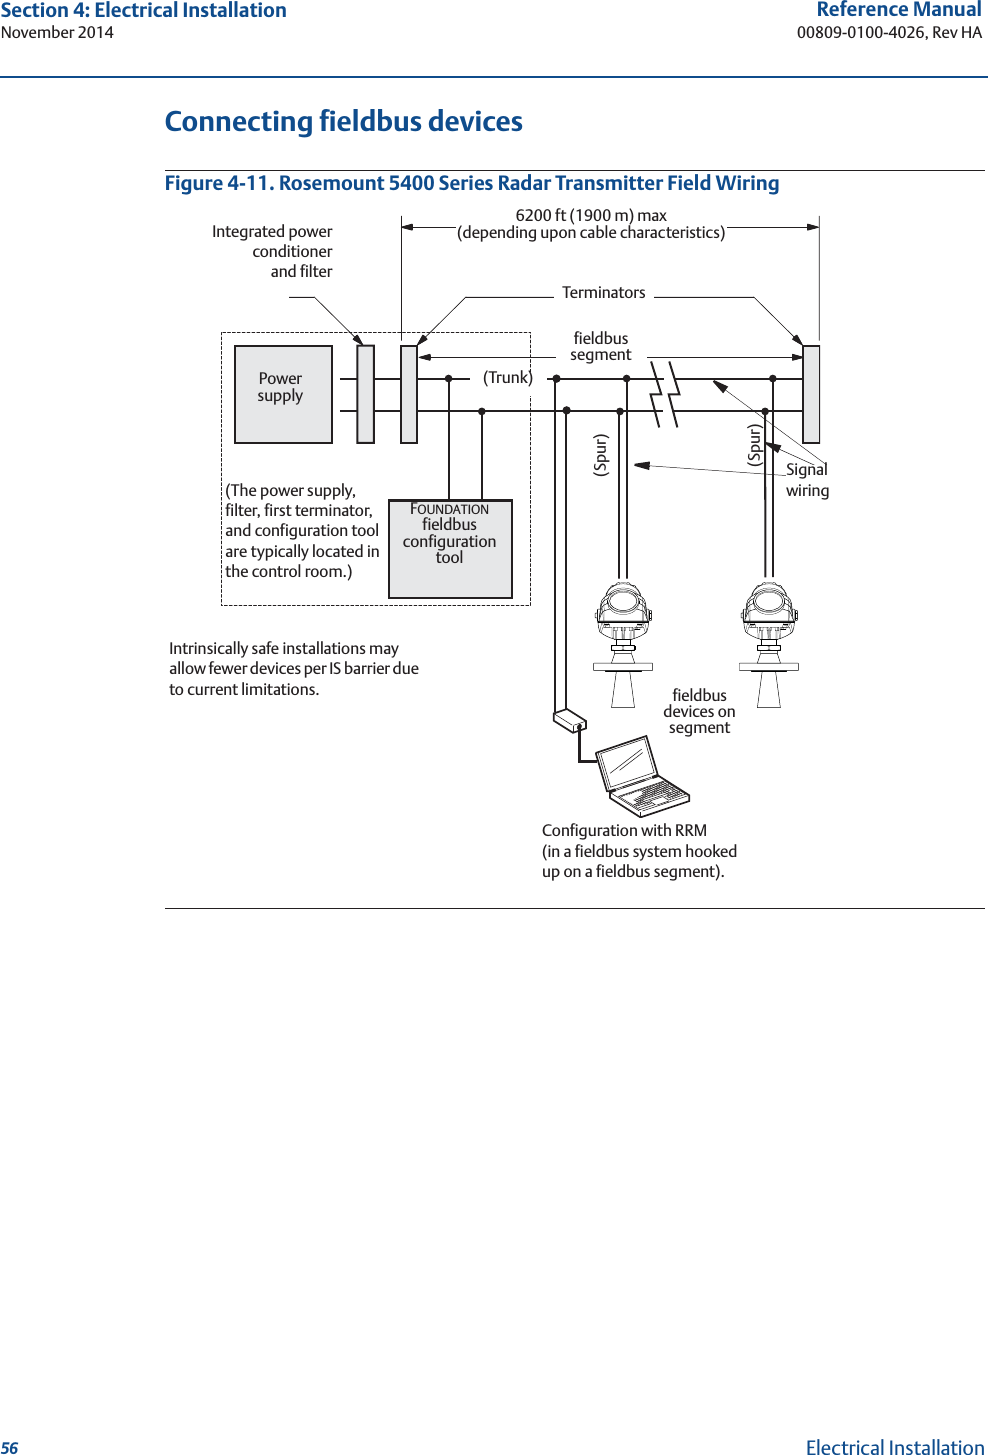 56Reference Manual00809-0100-4026, Rev HASection 4: Electrical InstallationNovember 2014Electrical InstallationConnecting fieldbus devicesFigure 4-11. Rosemount 5400 Series Radar Transmitter Field WiringSignal wiringPower supplyFOUNDATION fieldbus configuration toolTerminators6200 ft (1900 m) max(depending upon cable characteristics)Integrated powerconditionerand filter(Trunk)(Spur)(Spur)(The power supply, filter, first terminator, and configuration tool are typically located in the control room.)fieldbus segmentfieldbus devices on segmentIntrinsically safe installations may allow fewer devices per IS barrier due to current limitations.Configuration with RRM(in a fieldbus system hooked up on a fieldbus segment).